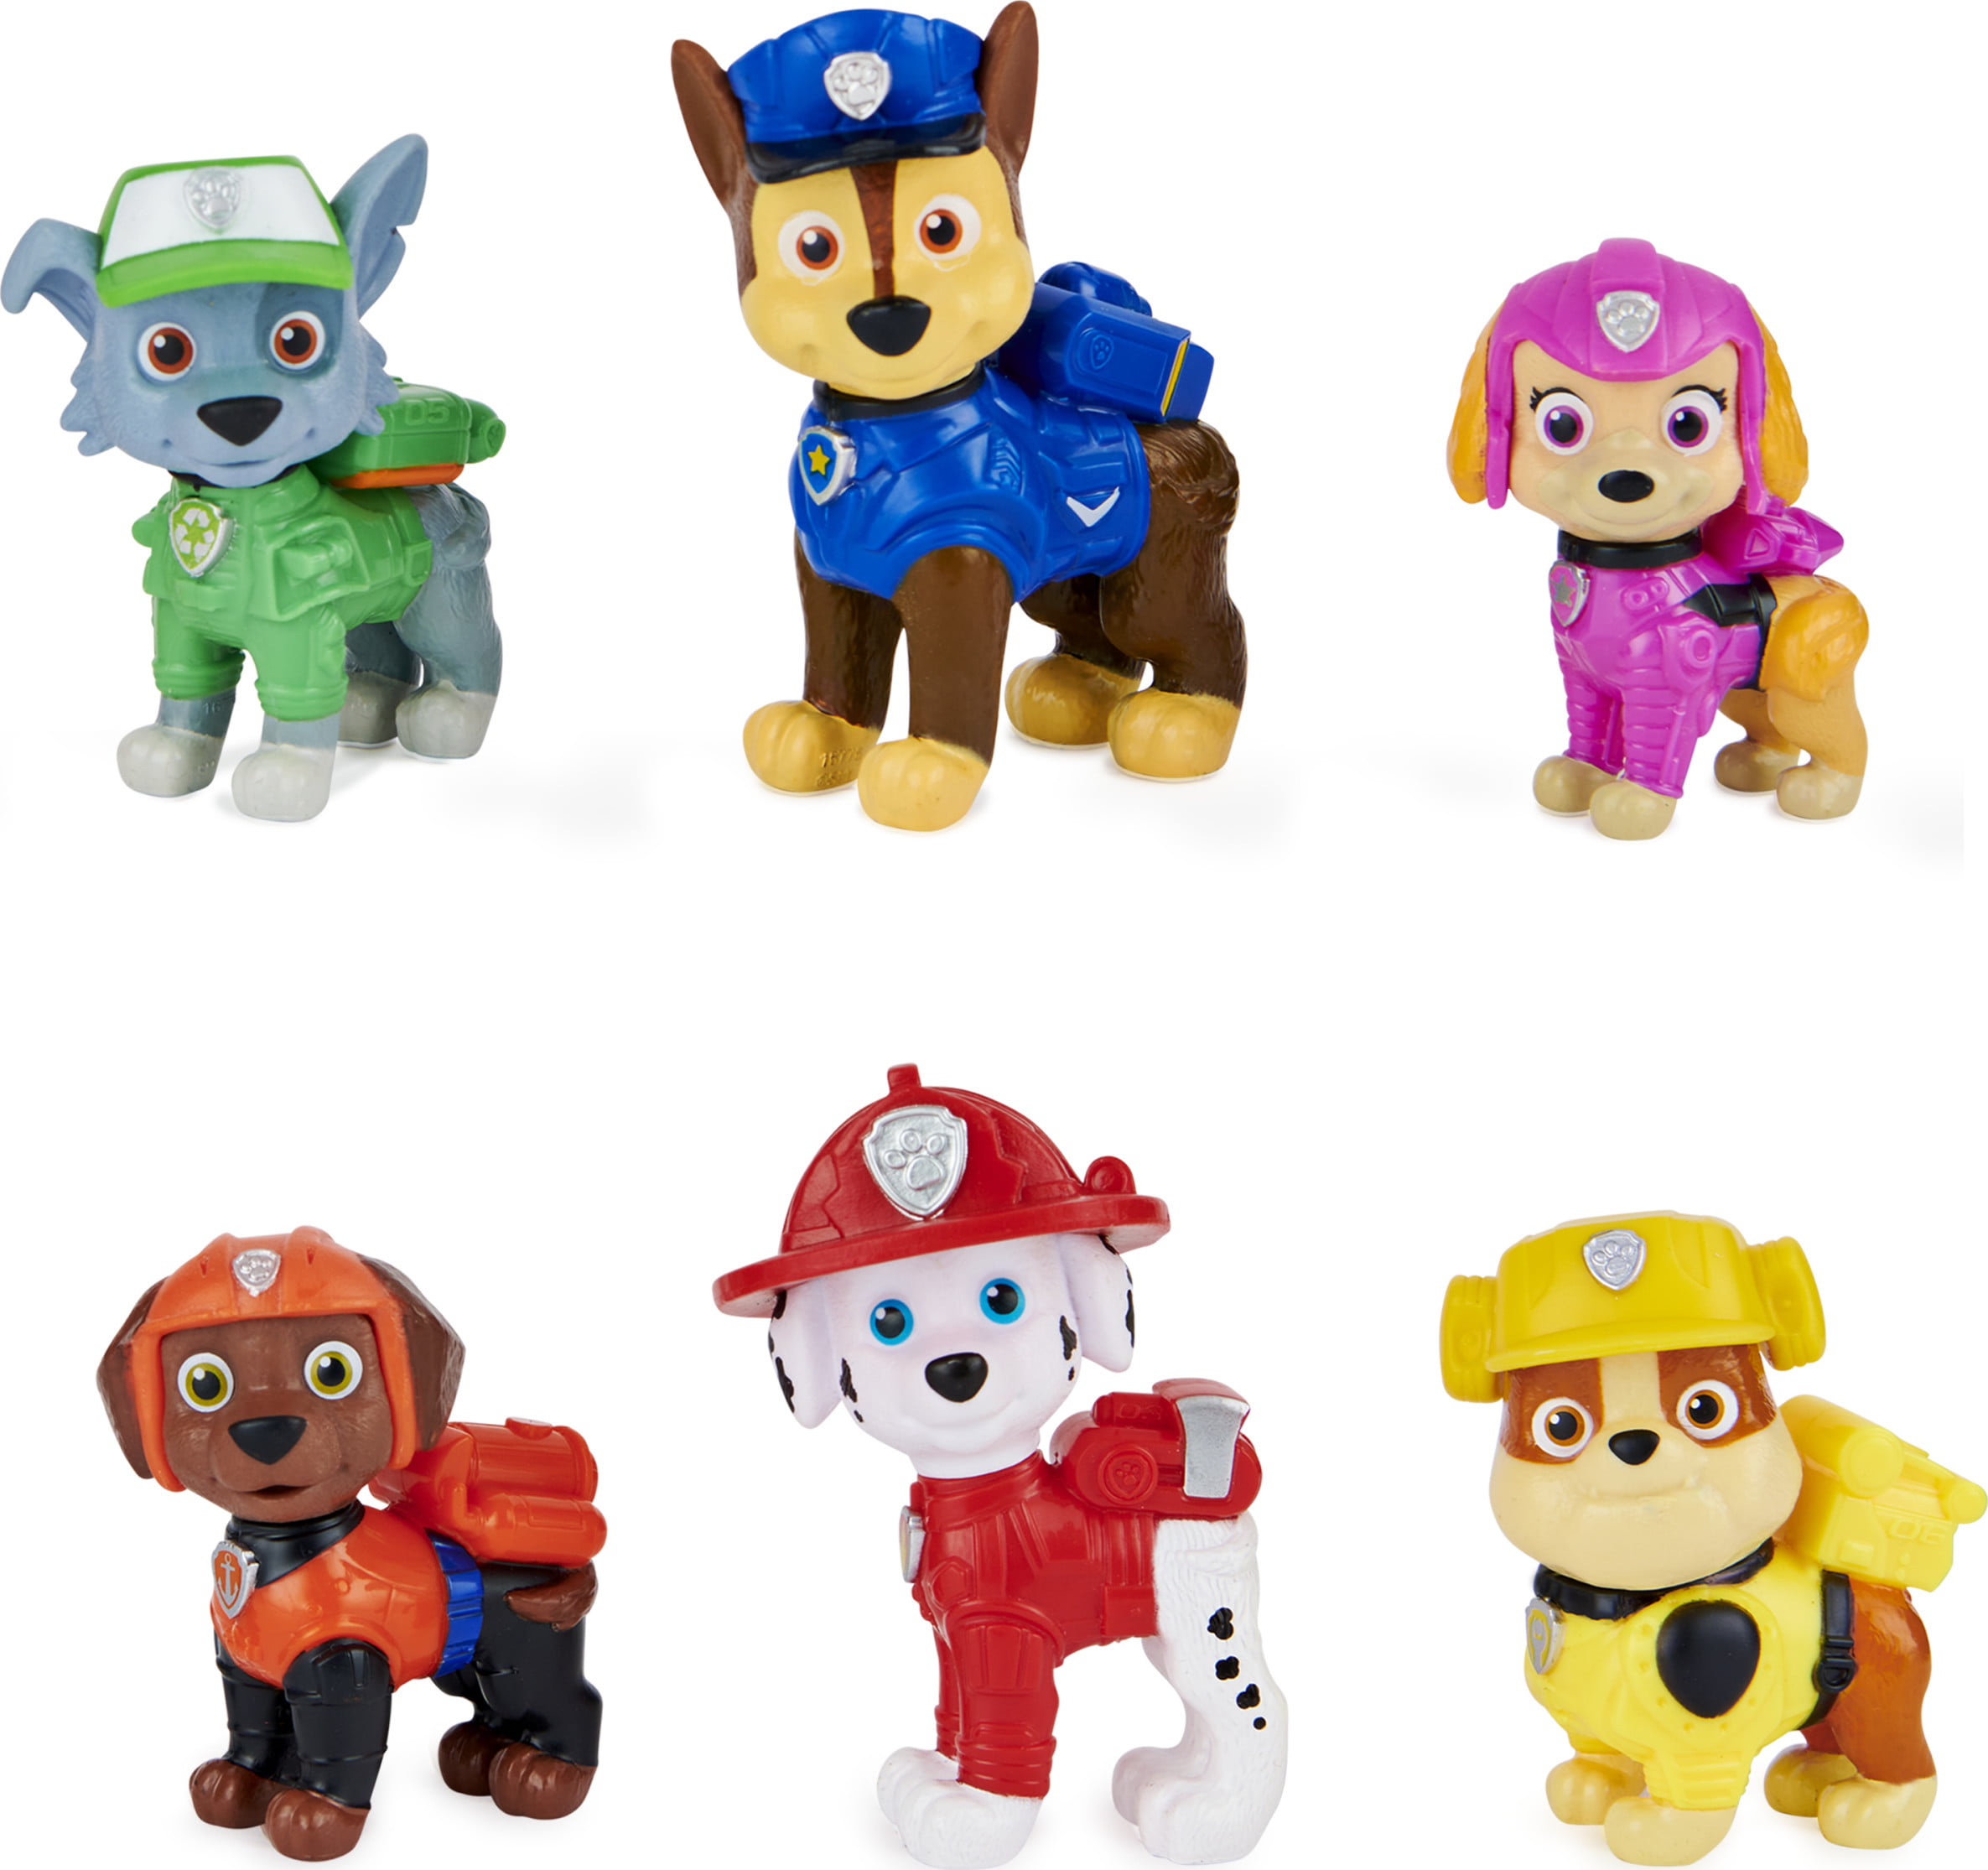 PAW Patrol Movie Action Figure Set for Ages 3 and Up Walmart.com